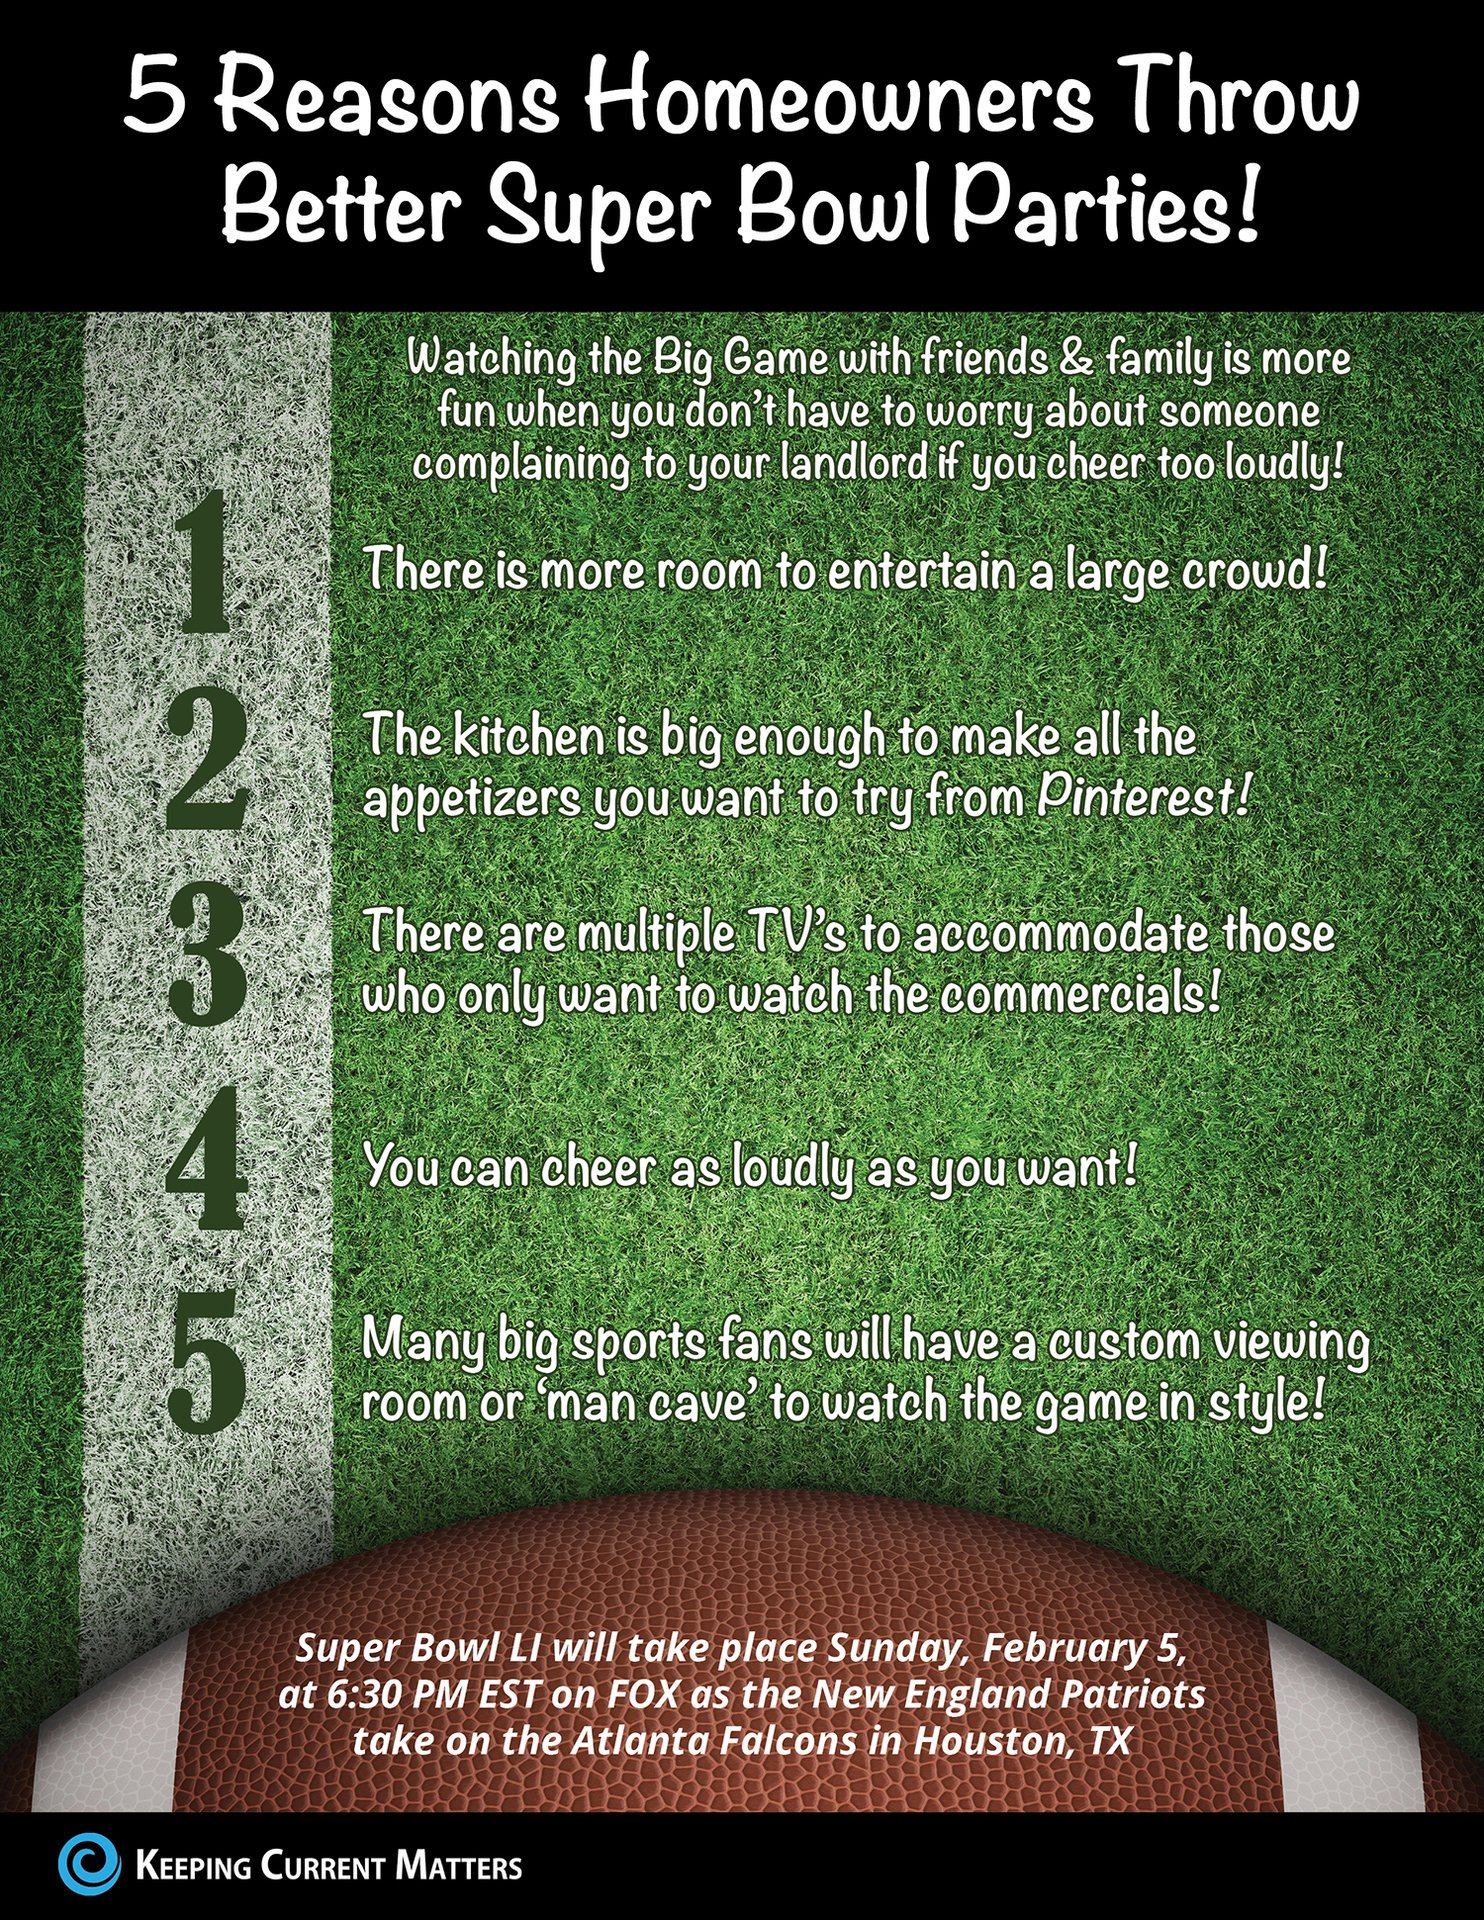 Super Bowl is better when you are a homeowner